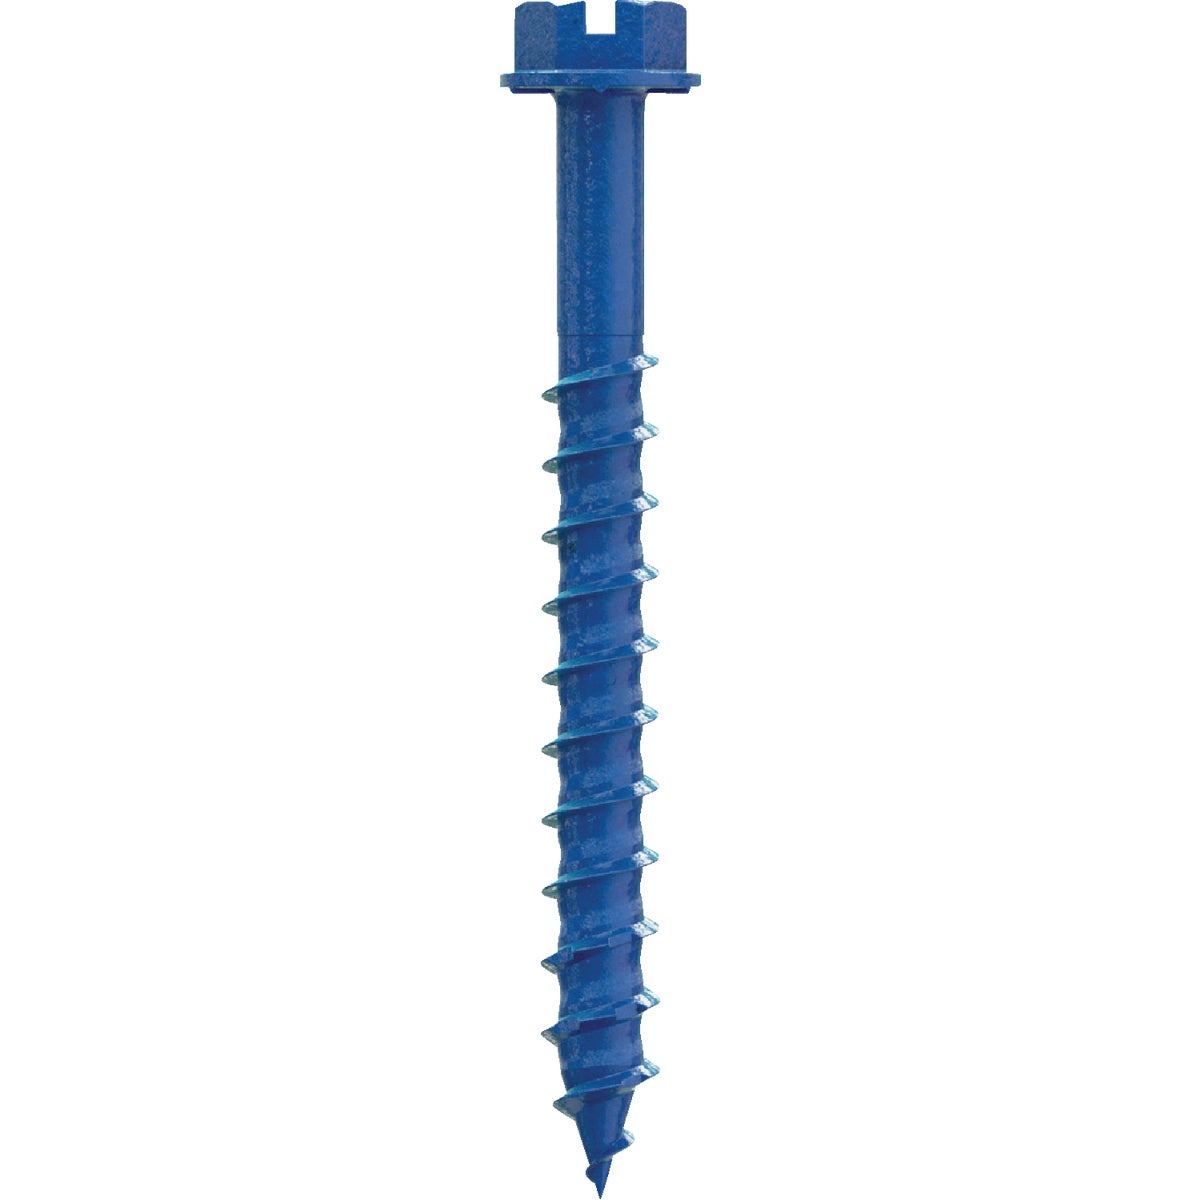 Simpson Strong-Tie Titen Turbo  1/4 in. x 2-1/4 in. Hex-Head Concrete and Masonry Screw, Blue (75-Qty)